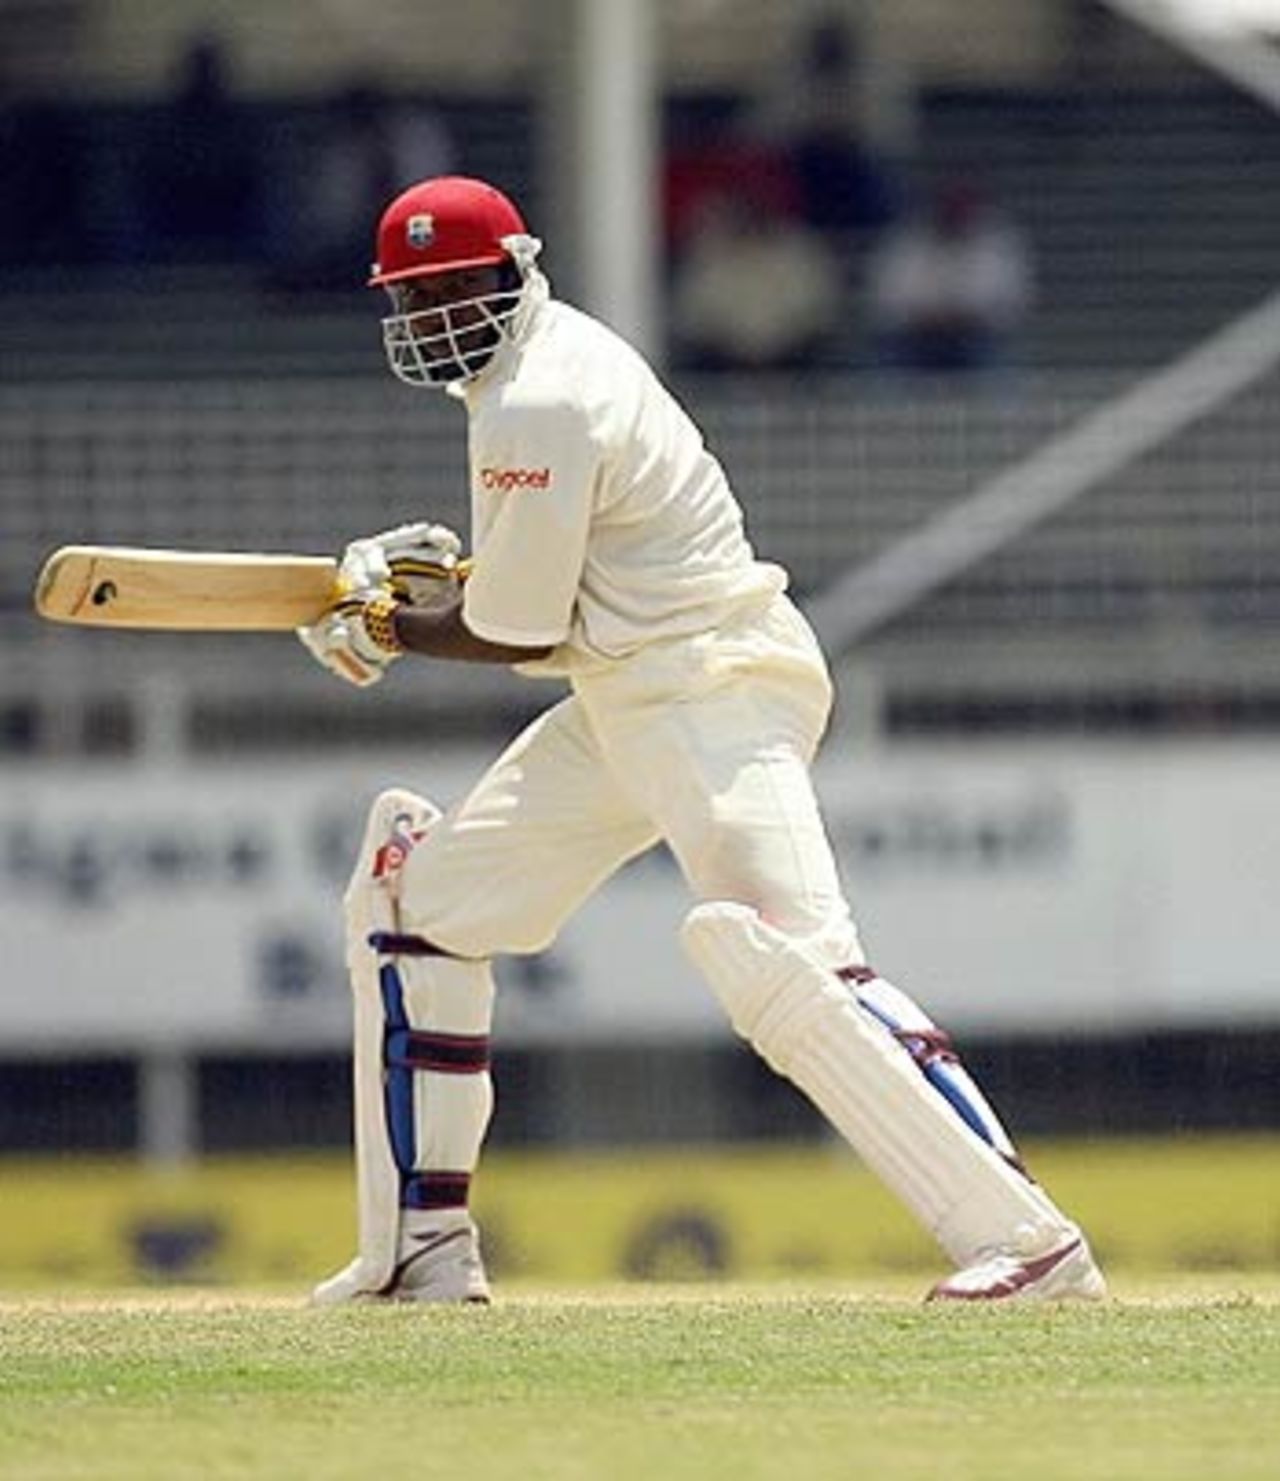 Chris Gayle glances the ball on the off side, West Indies v India, 1st Test, Antigua, 5th day, June 6, 2006